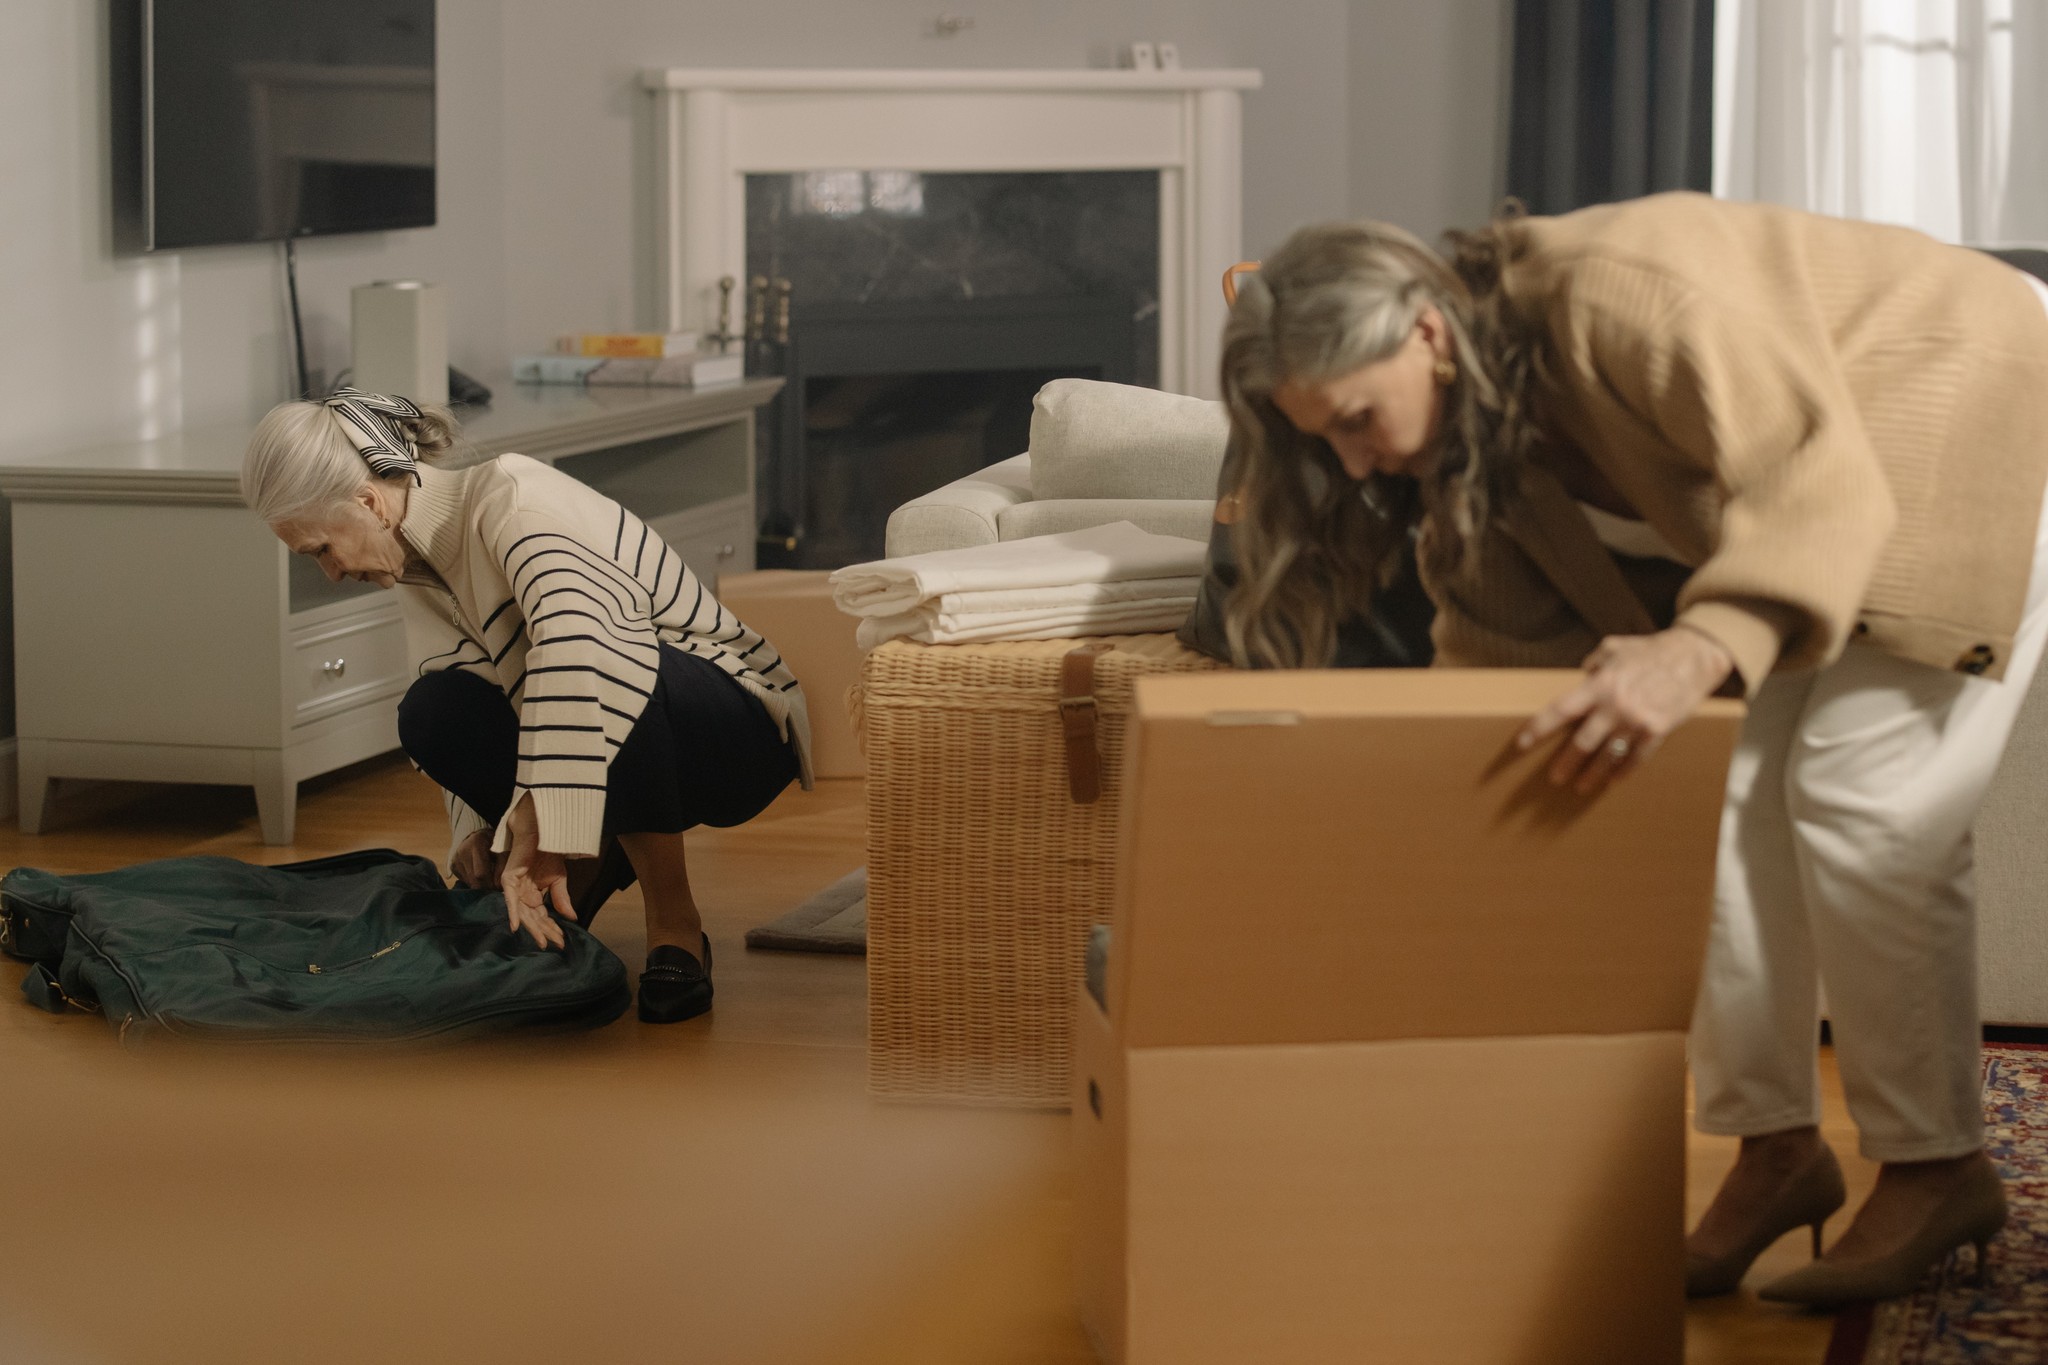 Two women packing boxes in a living room